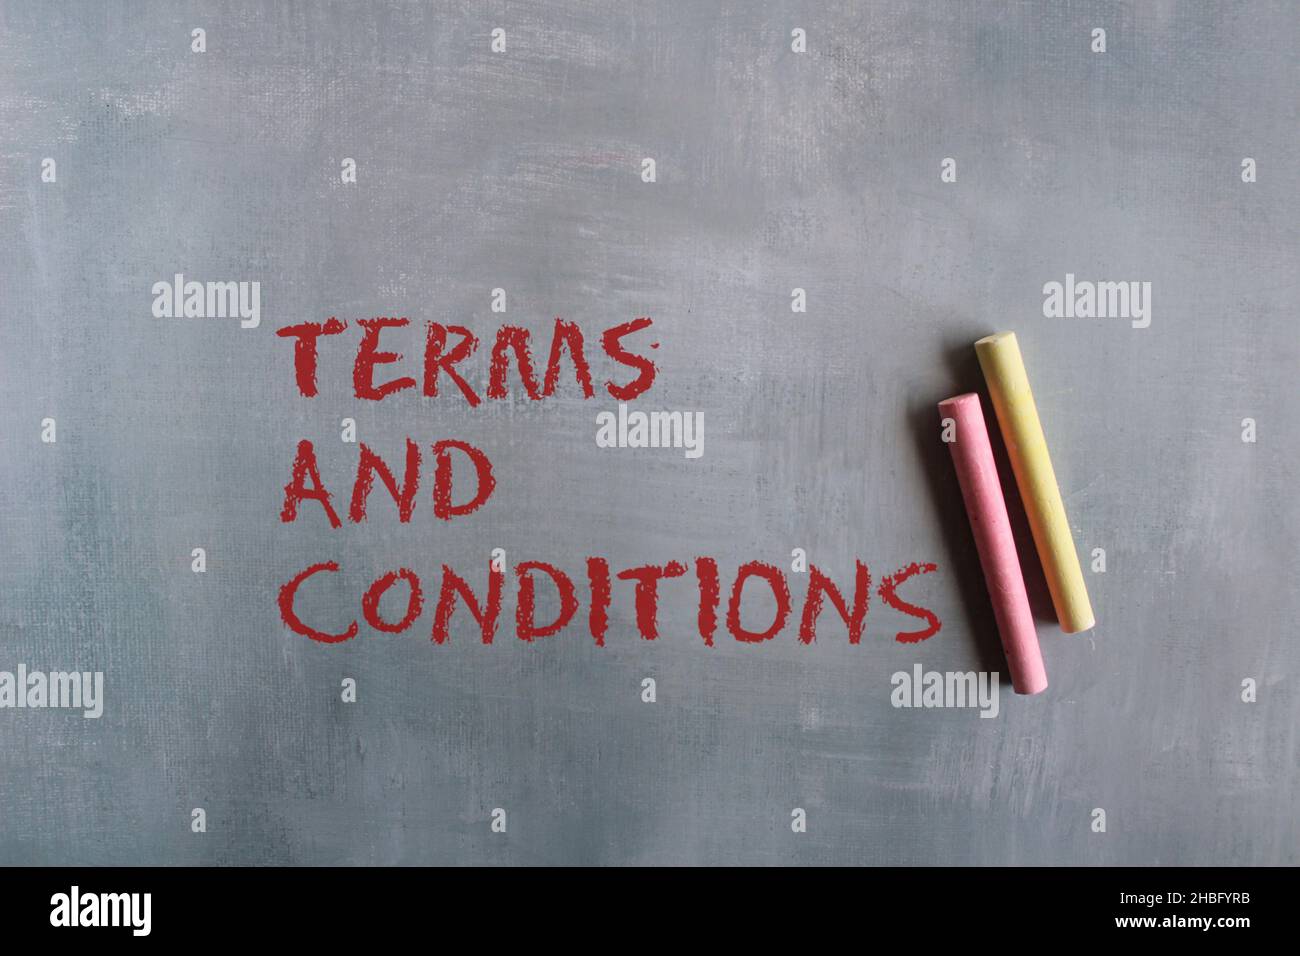 Business agreement and contract concept. Chalkboard handwriting text TERMS AND CONDITIONS on concrete floor Stock Photo